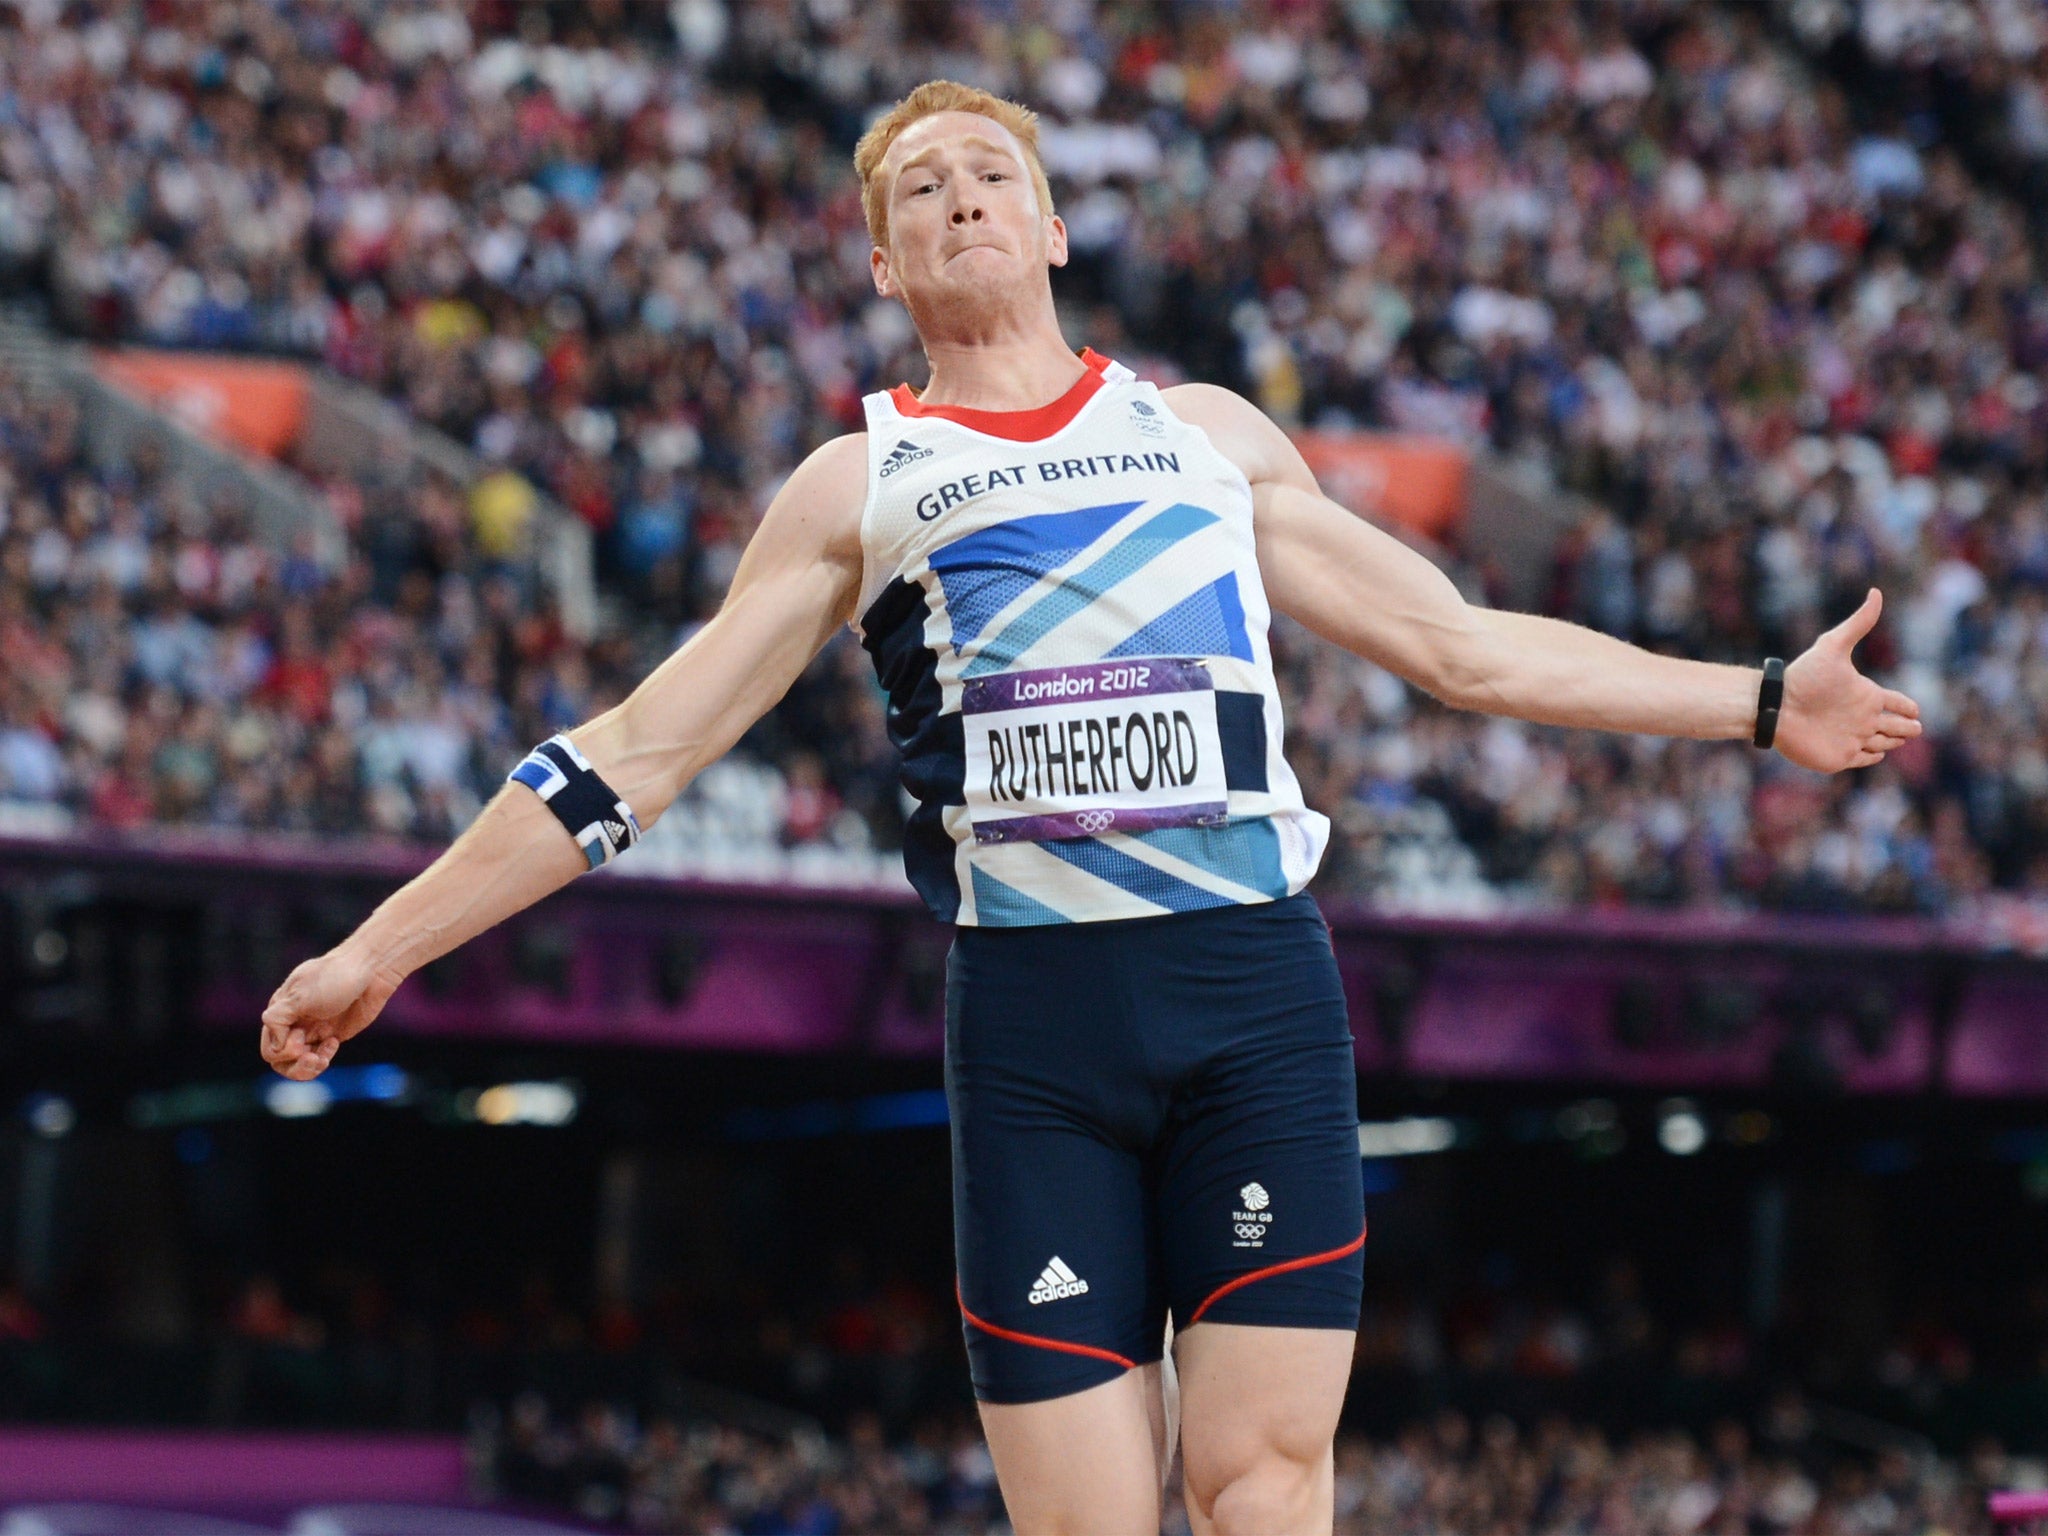 Greg Rutherford won Olympic gold on the same day as Mo Farah and Jessica Ennis-Hill